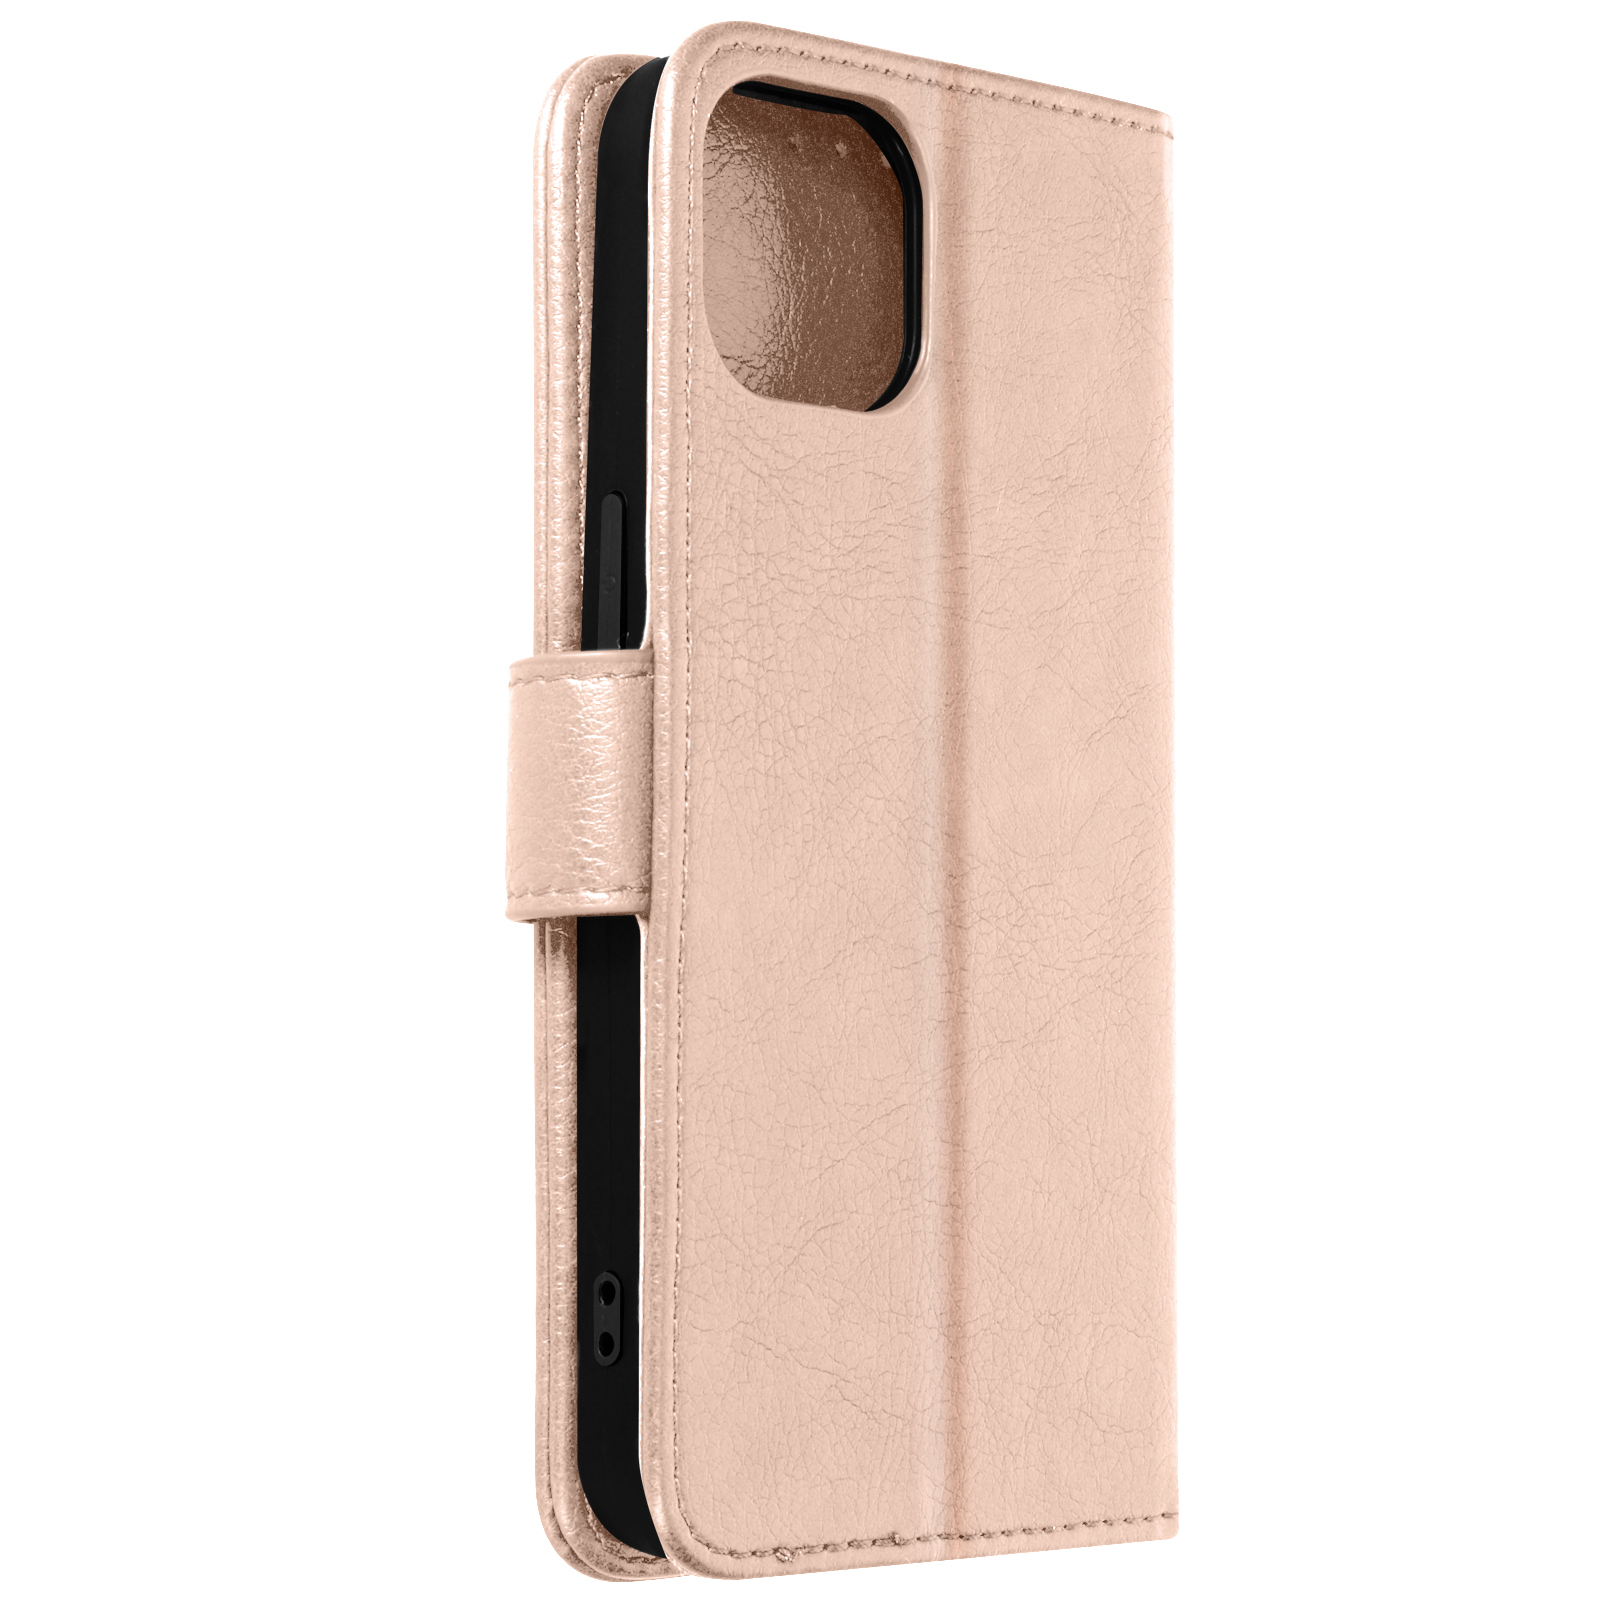 Pro Apple, AVIZAR iPhone Chesterfield Max, 13 Bookcover, Rosegold Series,